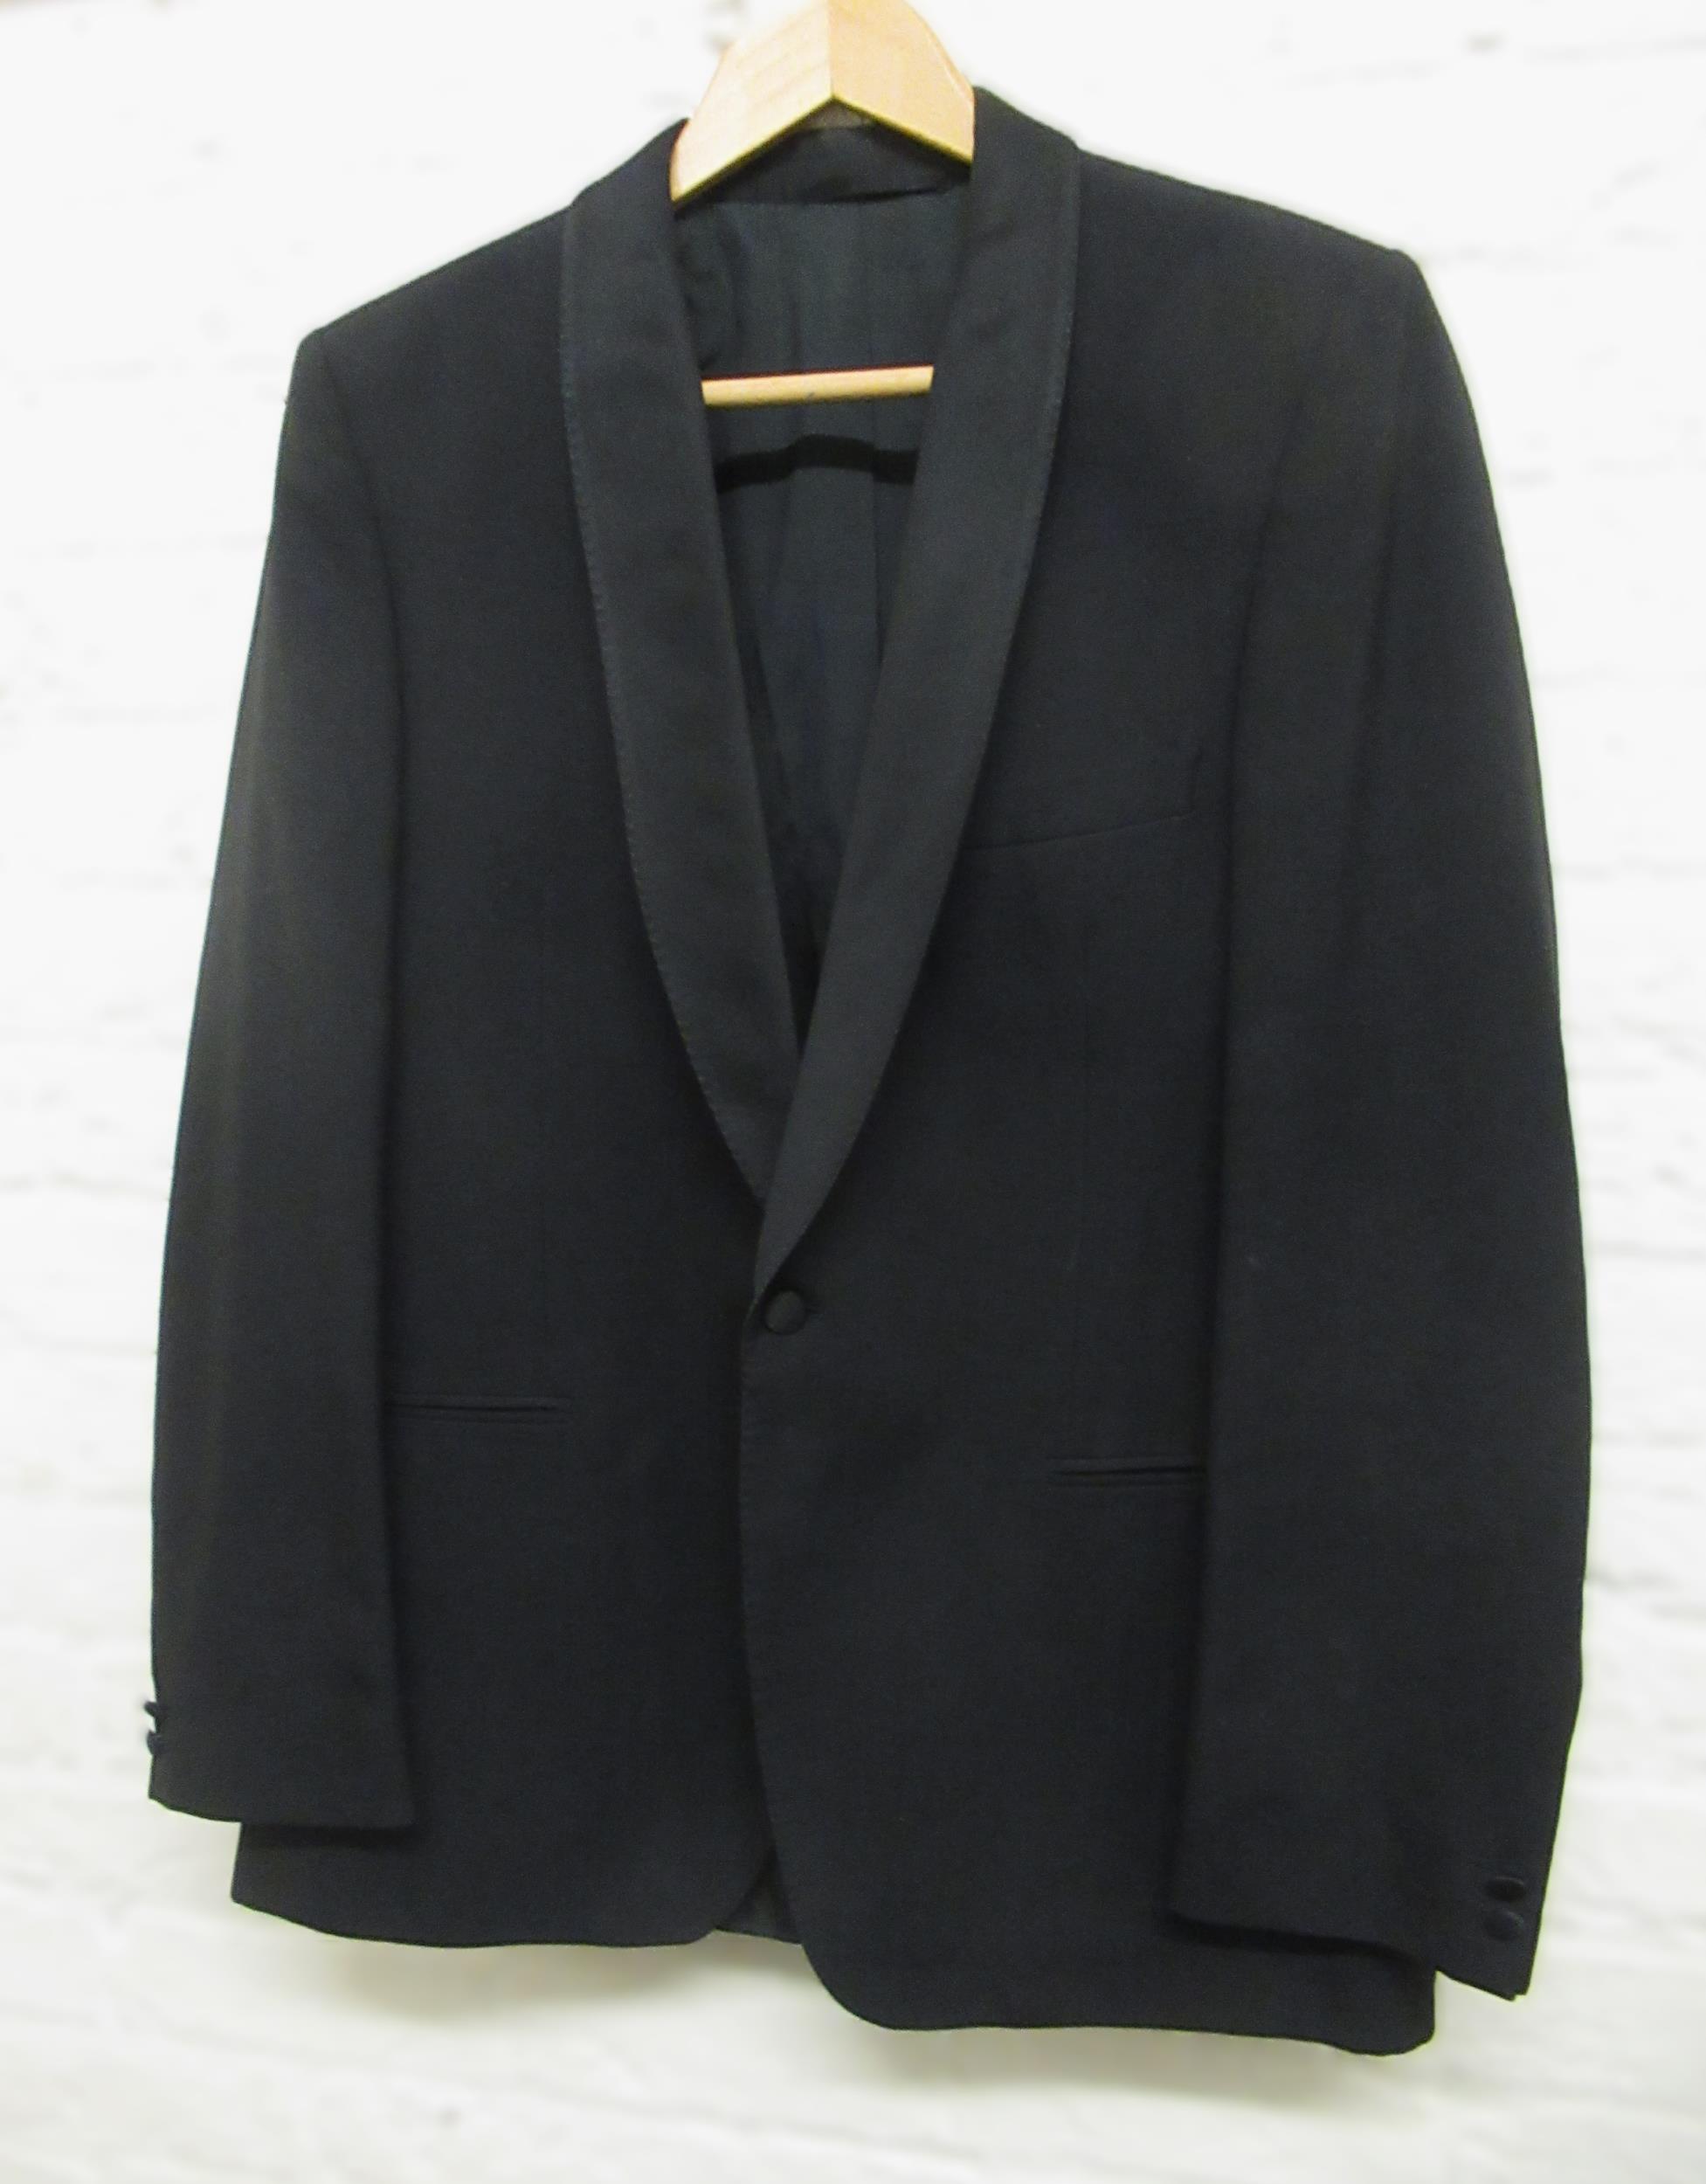 Yves Saint Laurent gentleman's suit and a Moss Bros dinner suit, together with various other